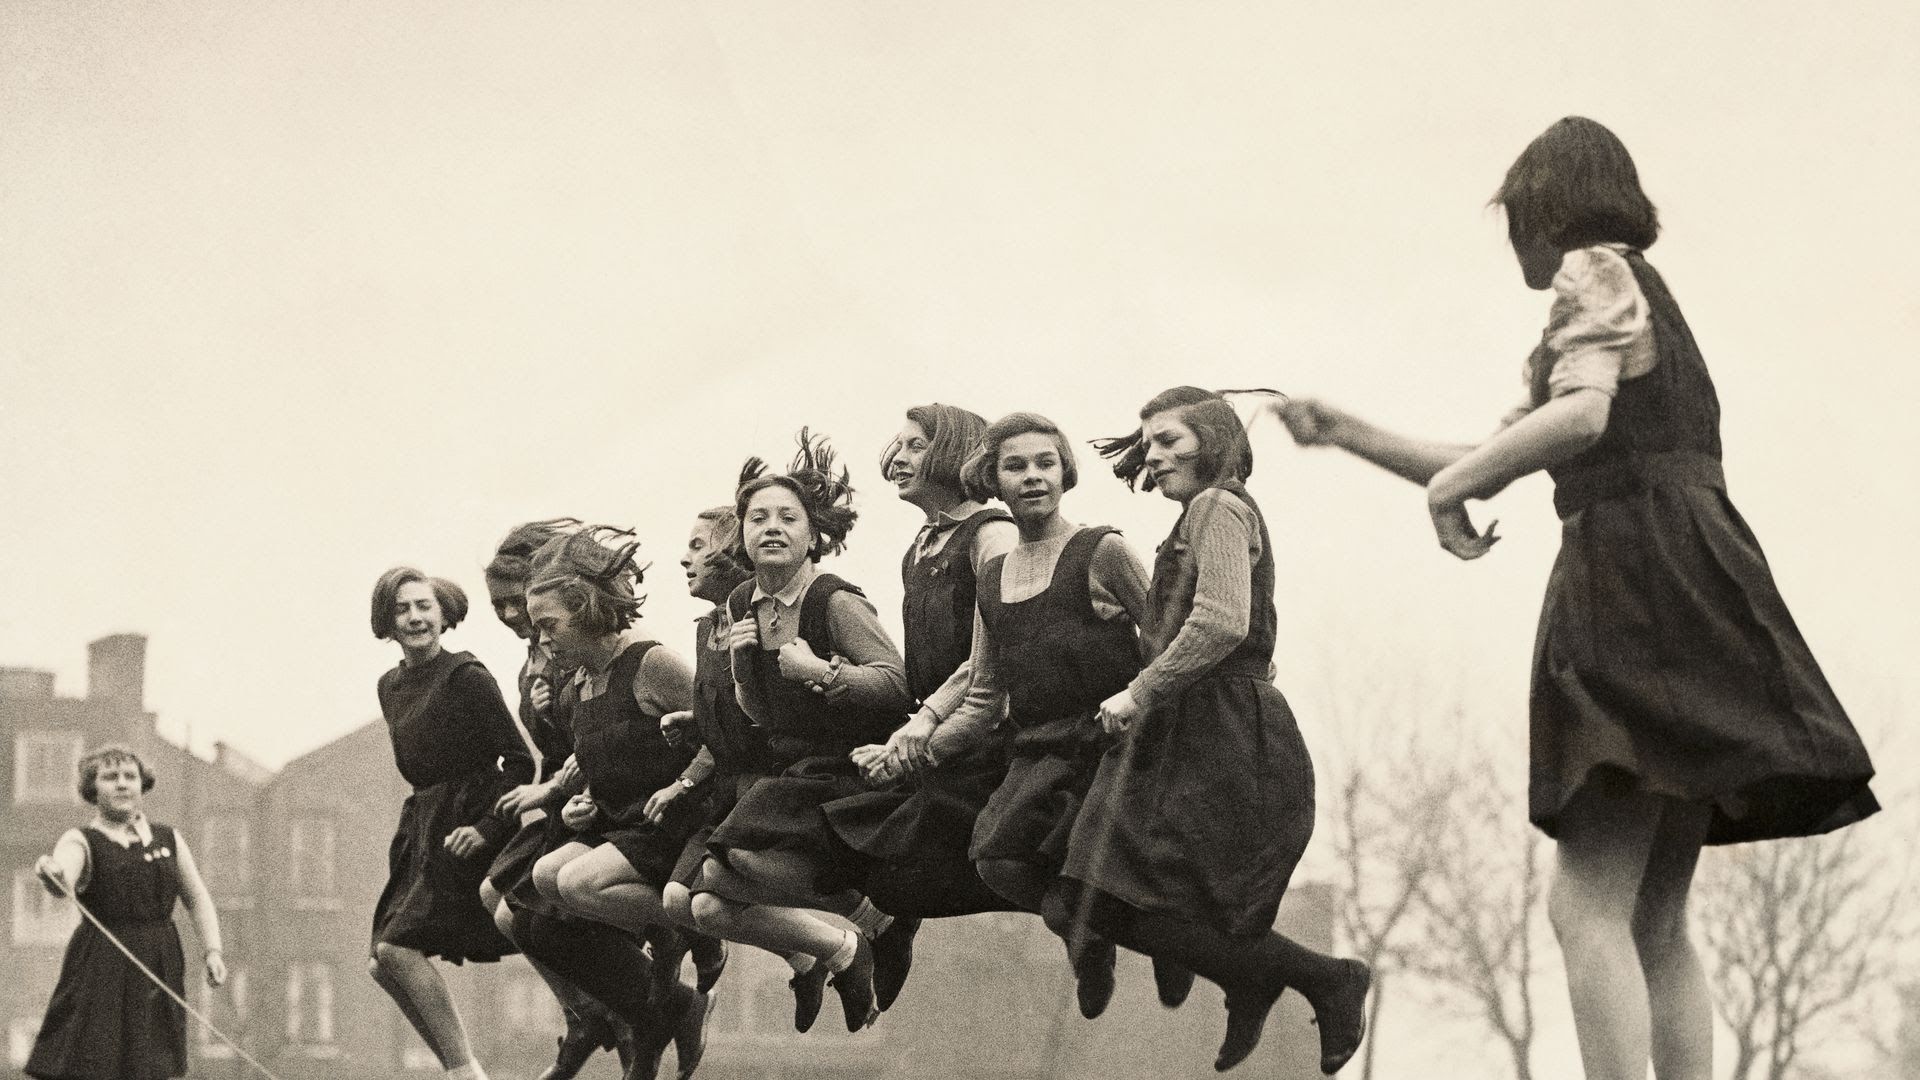 A black and white photo of schoolgirls in uniform jumping rope